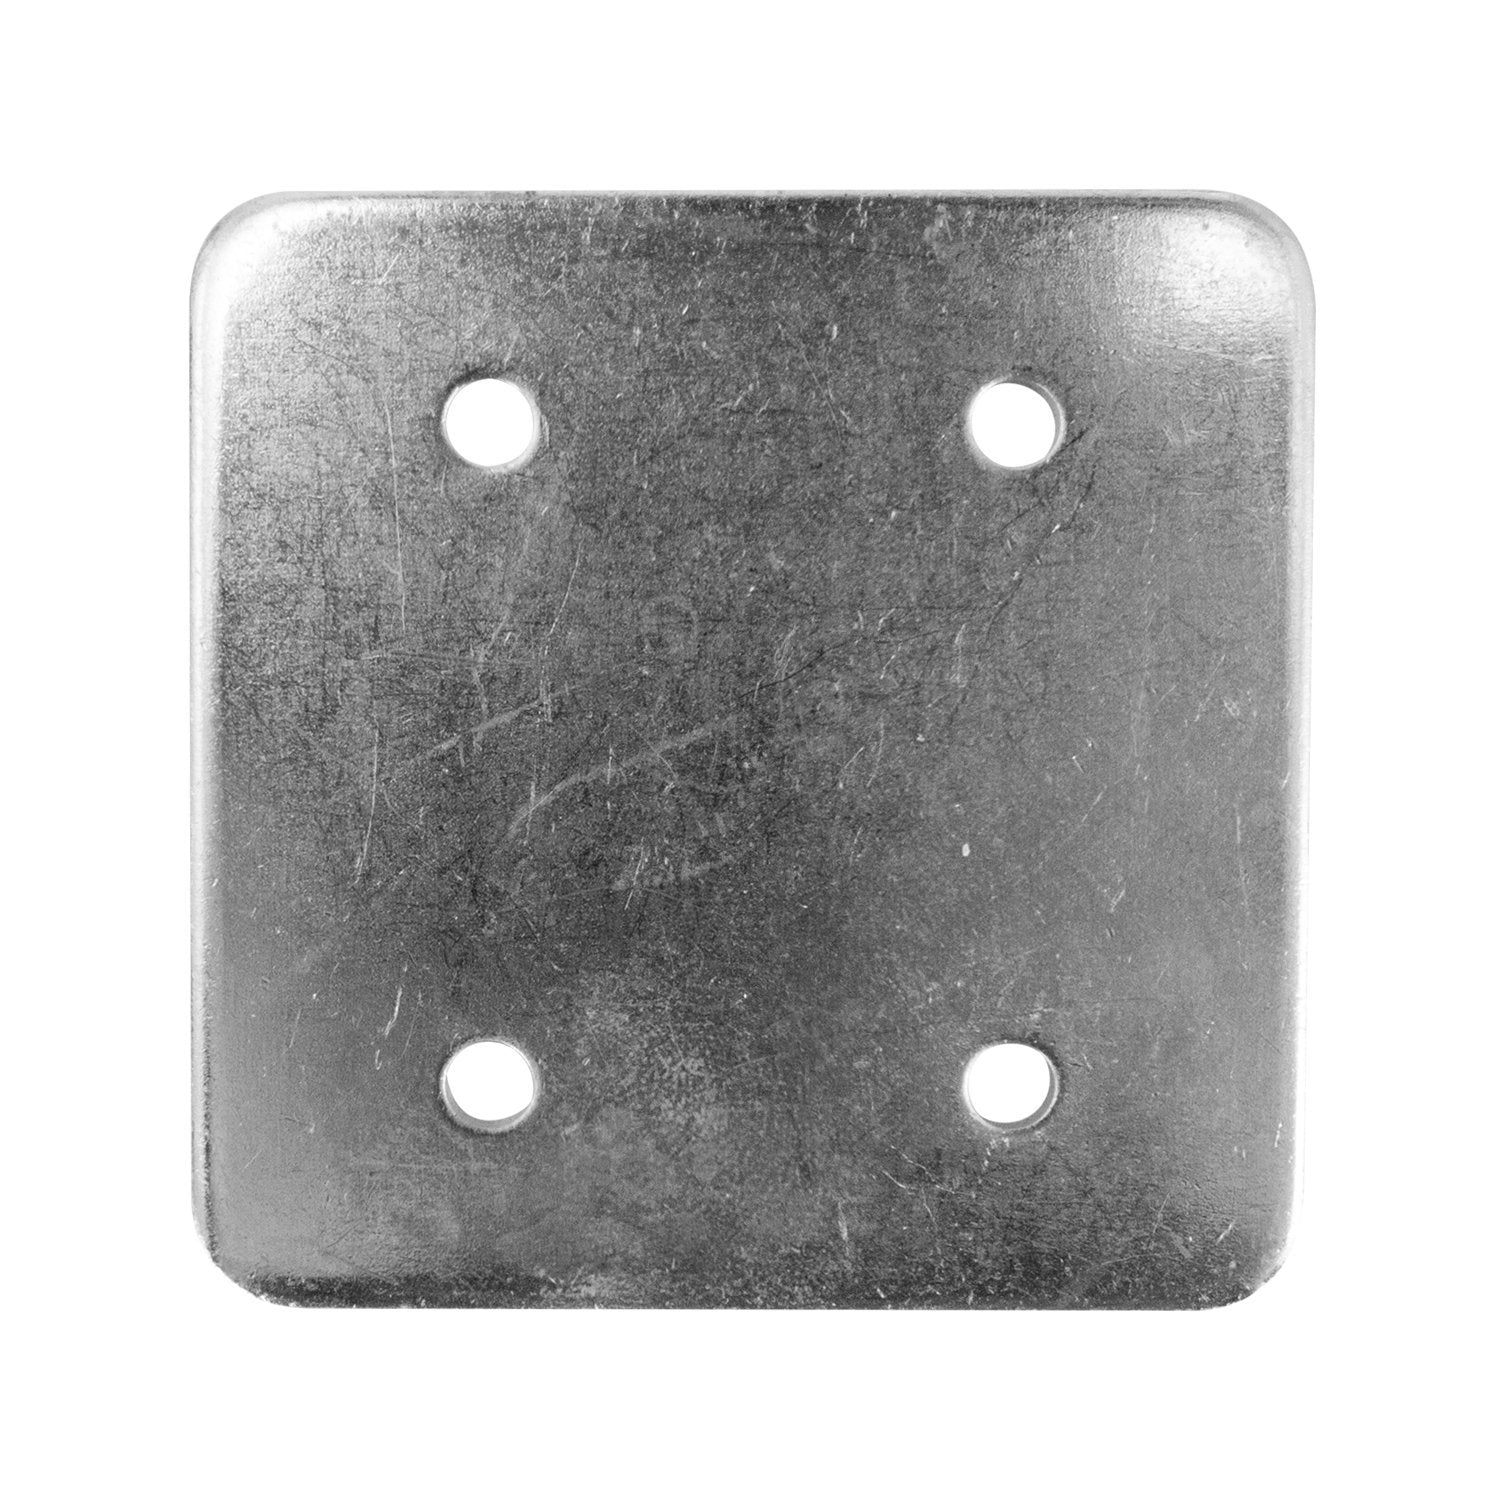 iBOLT™ 4 Hole AMPS Pattern Metal Backing Plate